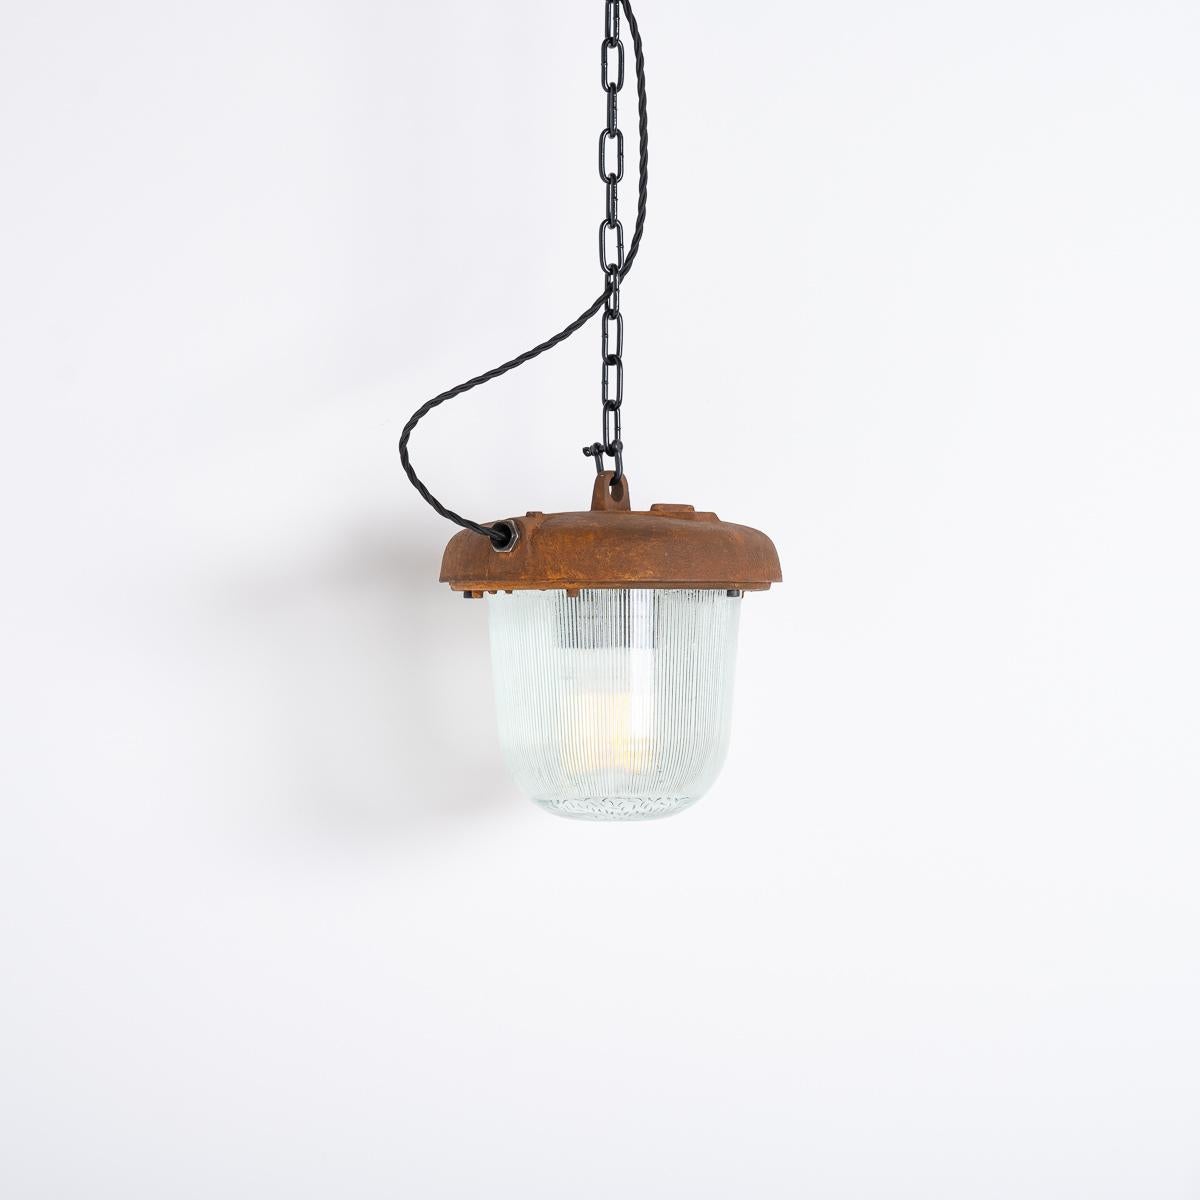 Czech Reclaimed Rusted Polish Industrial Pendant Lights With Prismatic Glass For Sale